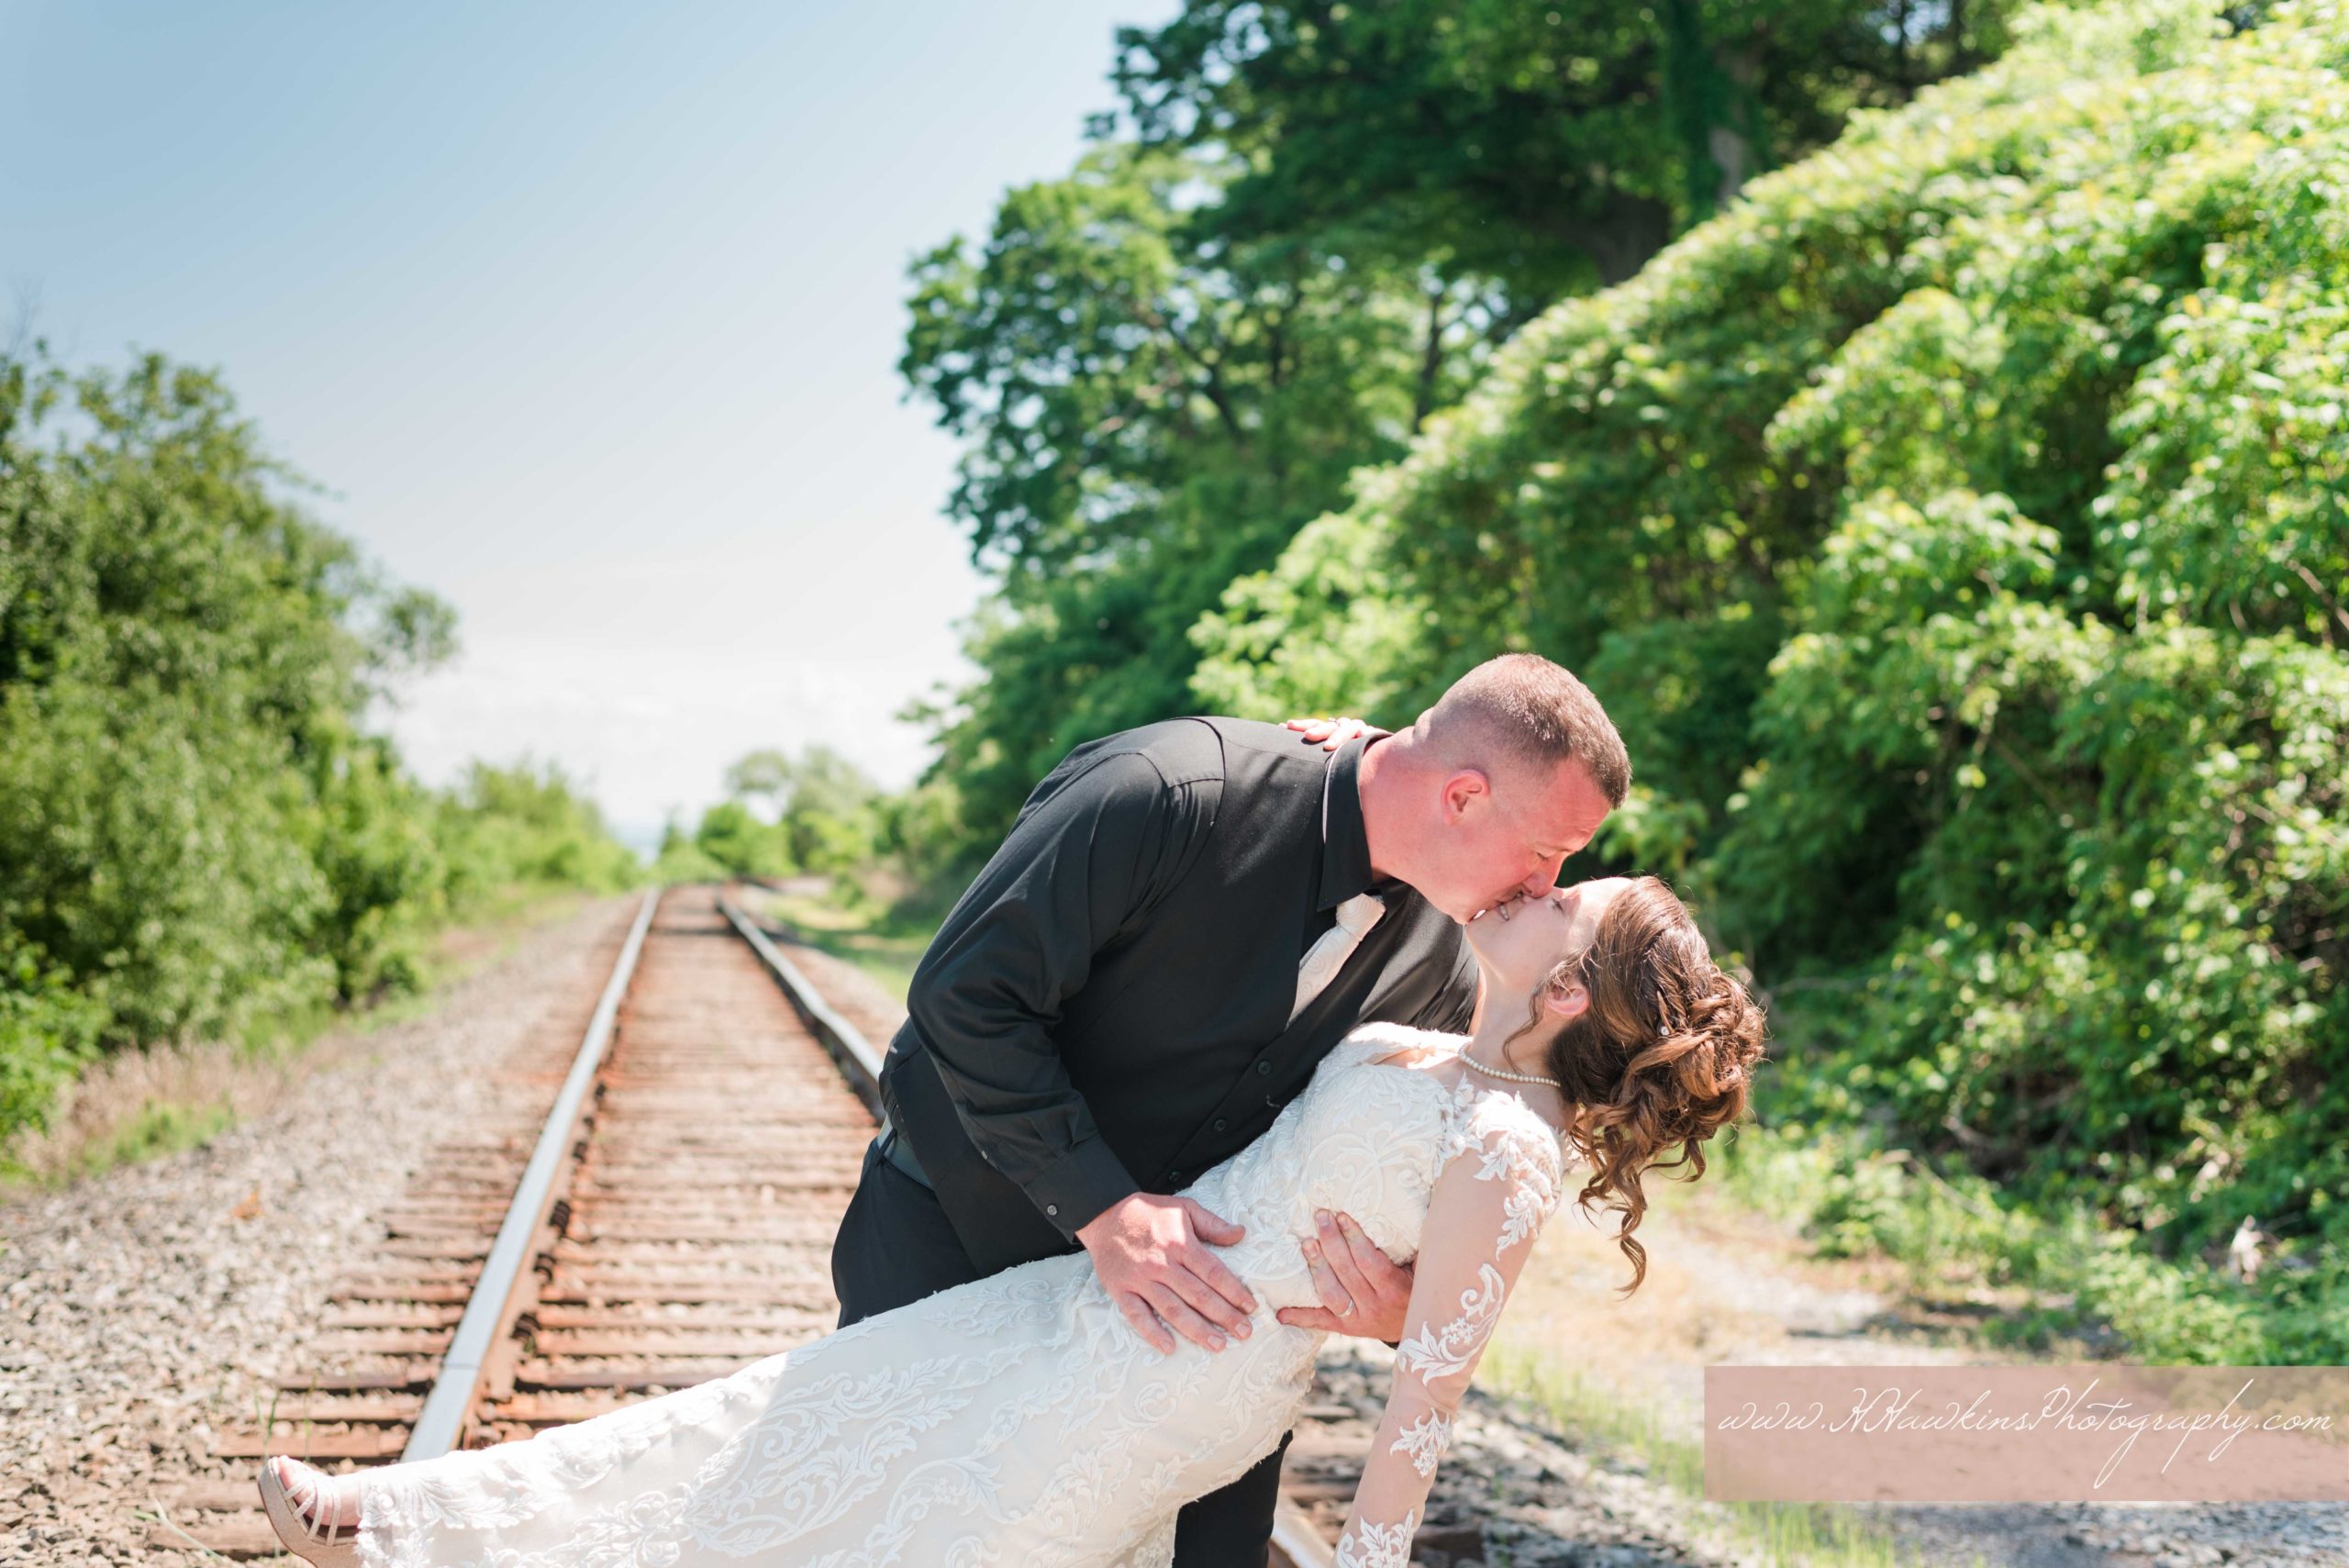 Groom dip kisses bride on the train tracks down by the lake at their Belhurst Castle on the lake wedding